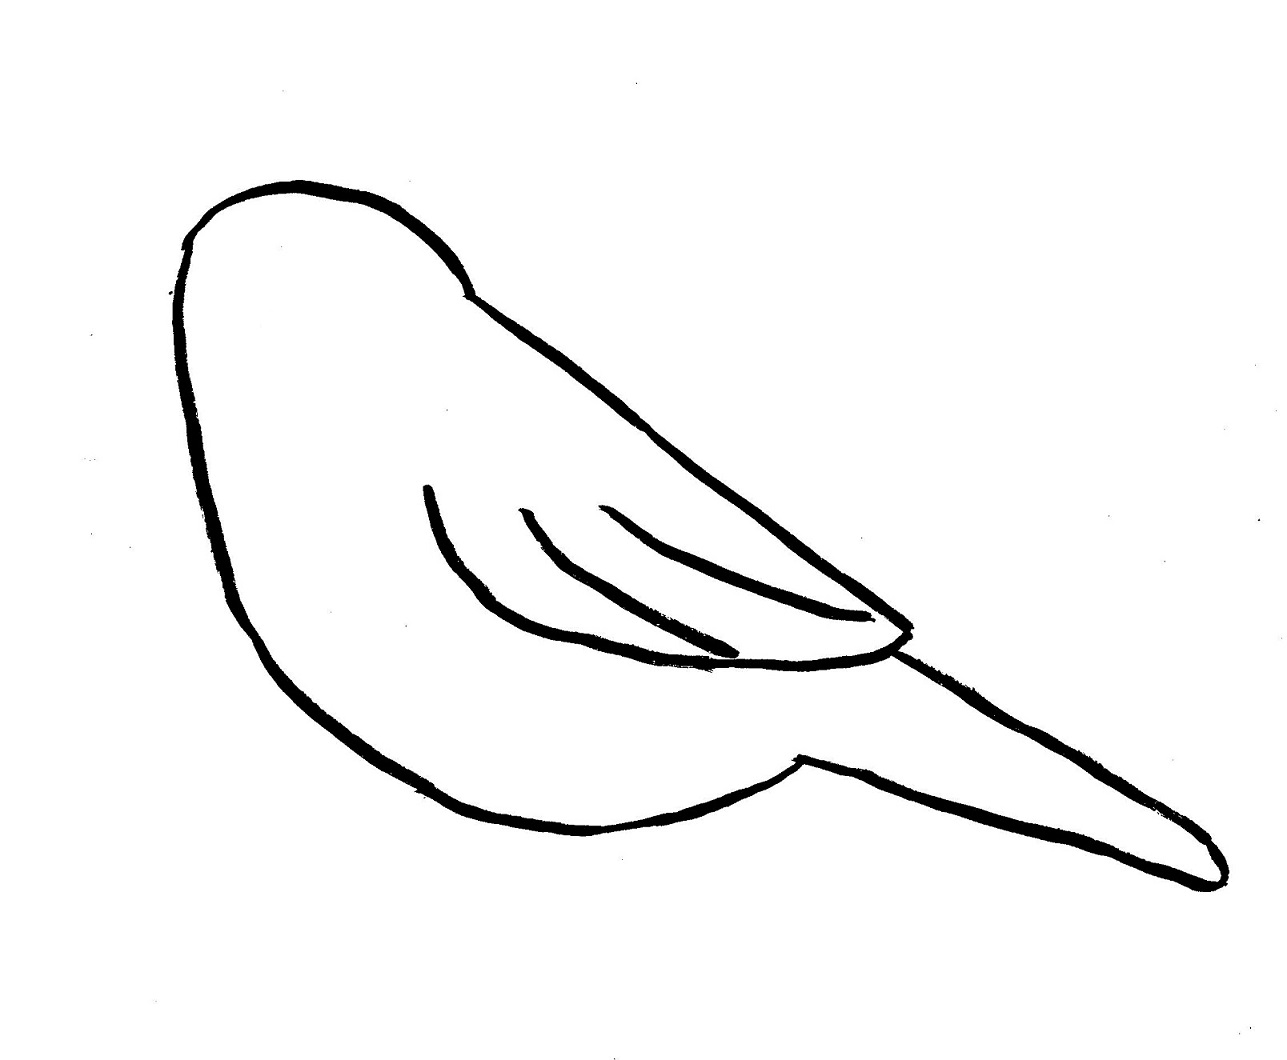 how to draw a easy bird step by step